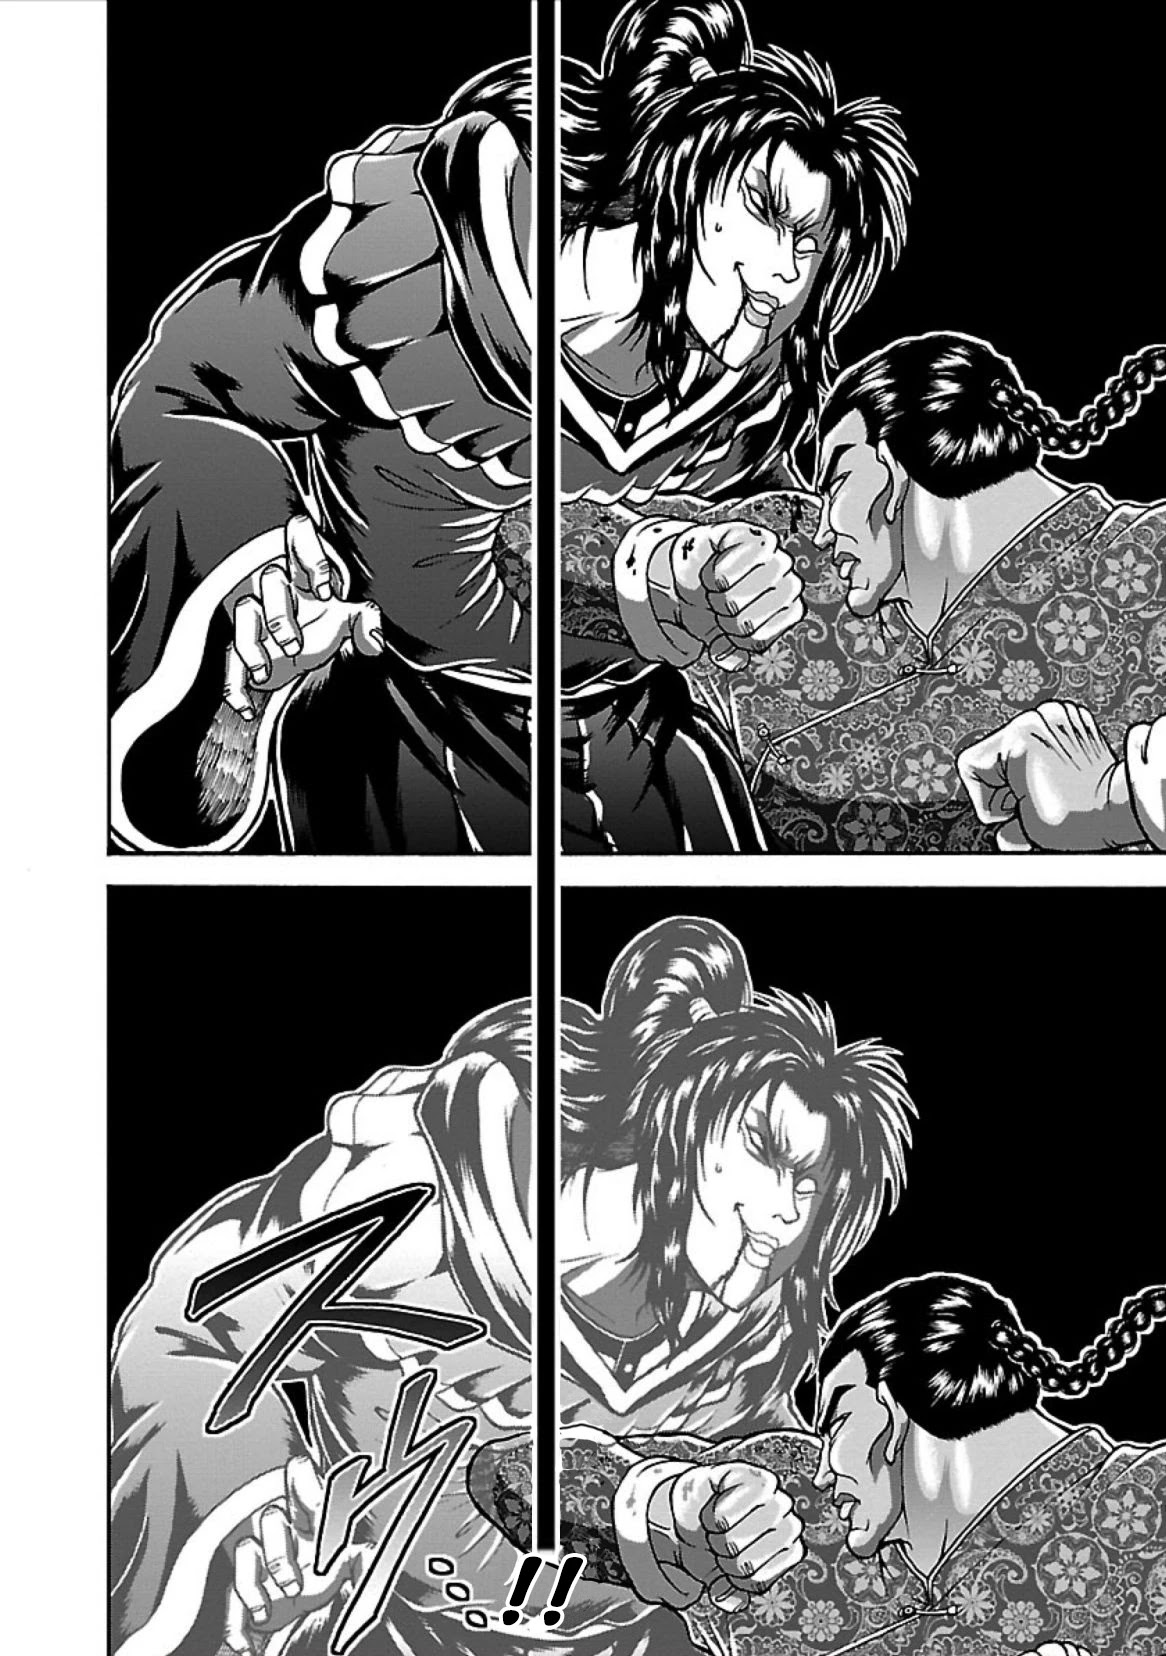 Baki Side Story - Retsu Kaioh Doesn't Mind Even If It's In Another World - Page 2